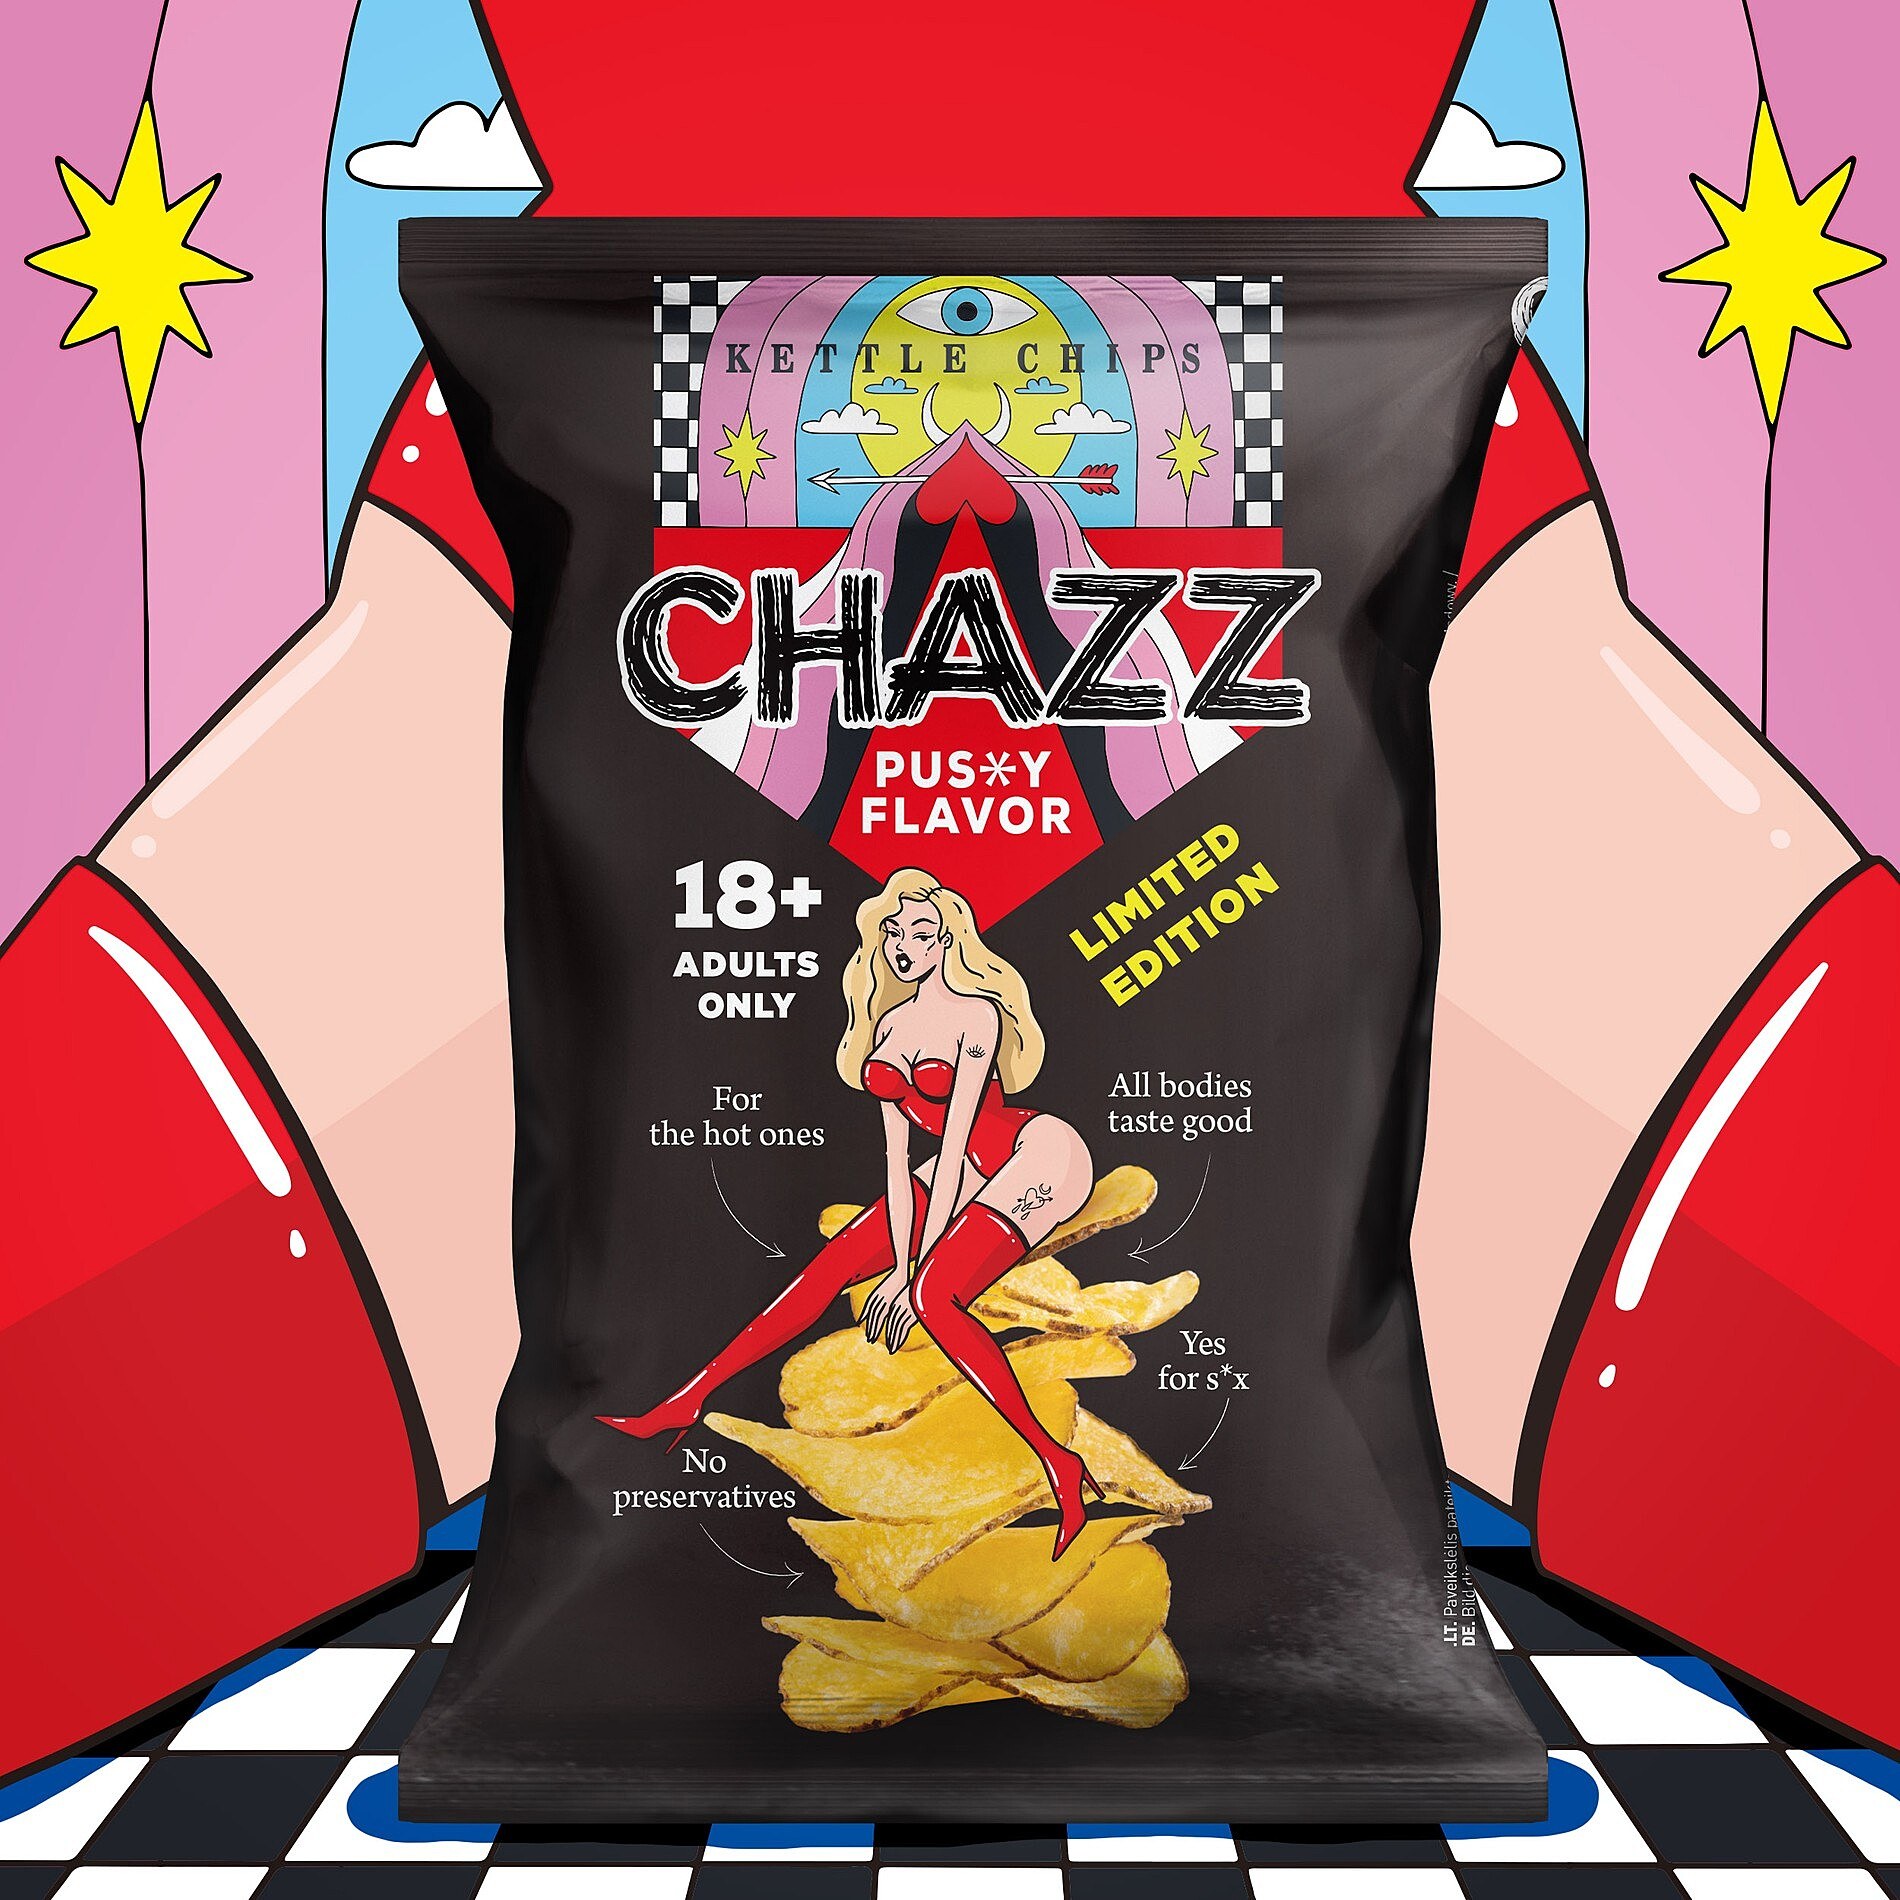 Chazz pussy flavor